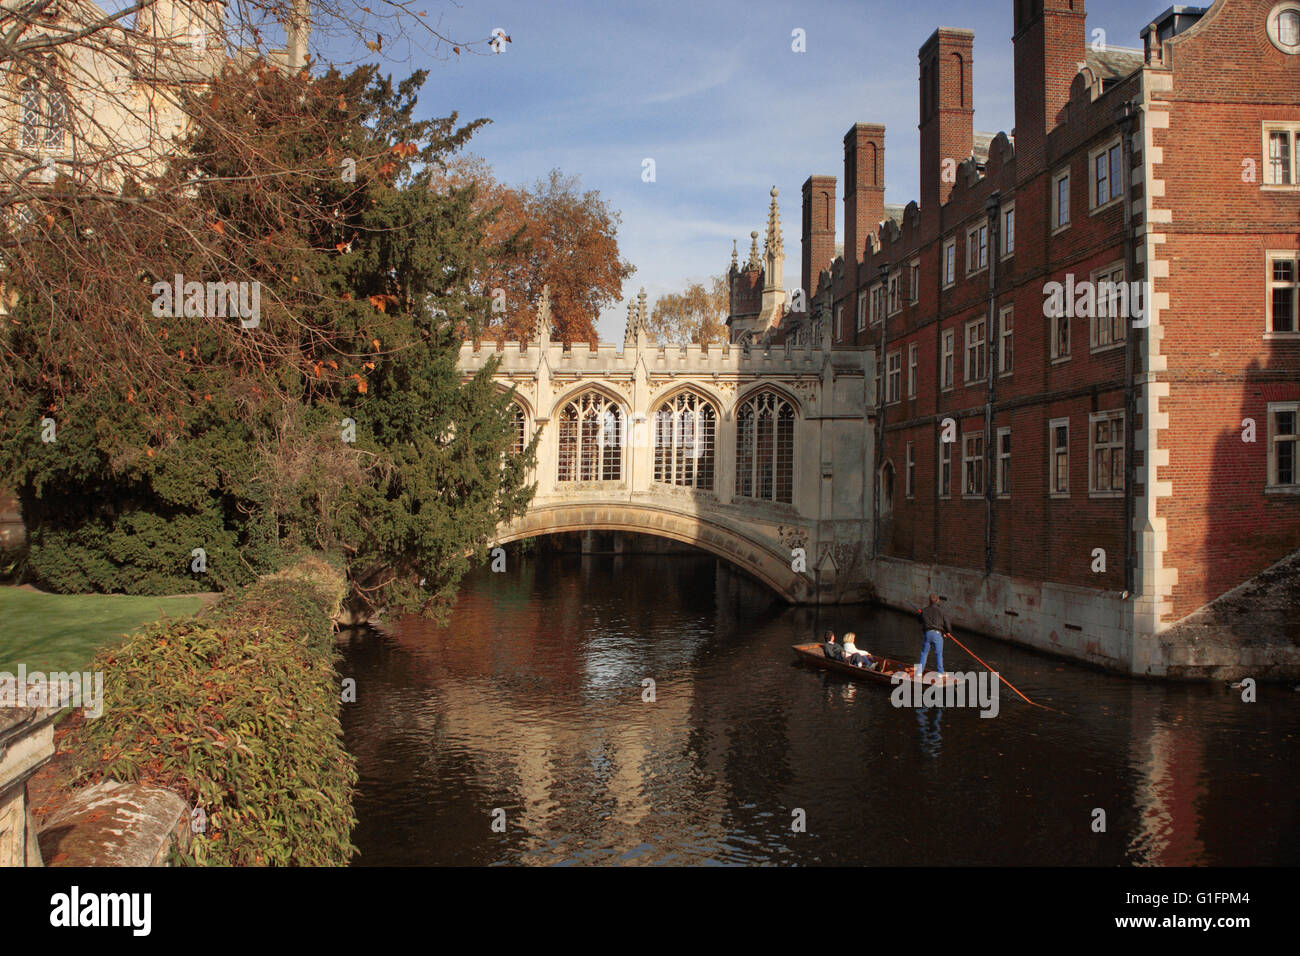 Bridge of Sighs, St. John's College, Cambridge, England, from the Kitchen Bridge over the River Cam Stock Photo